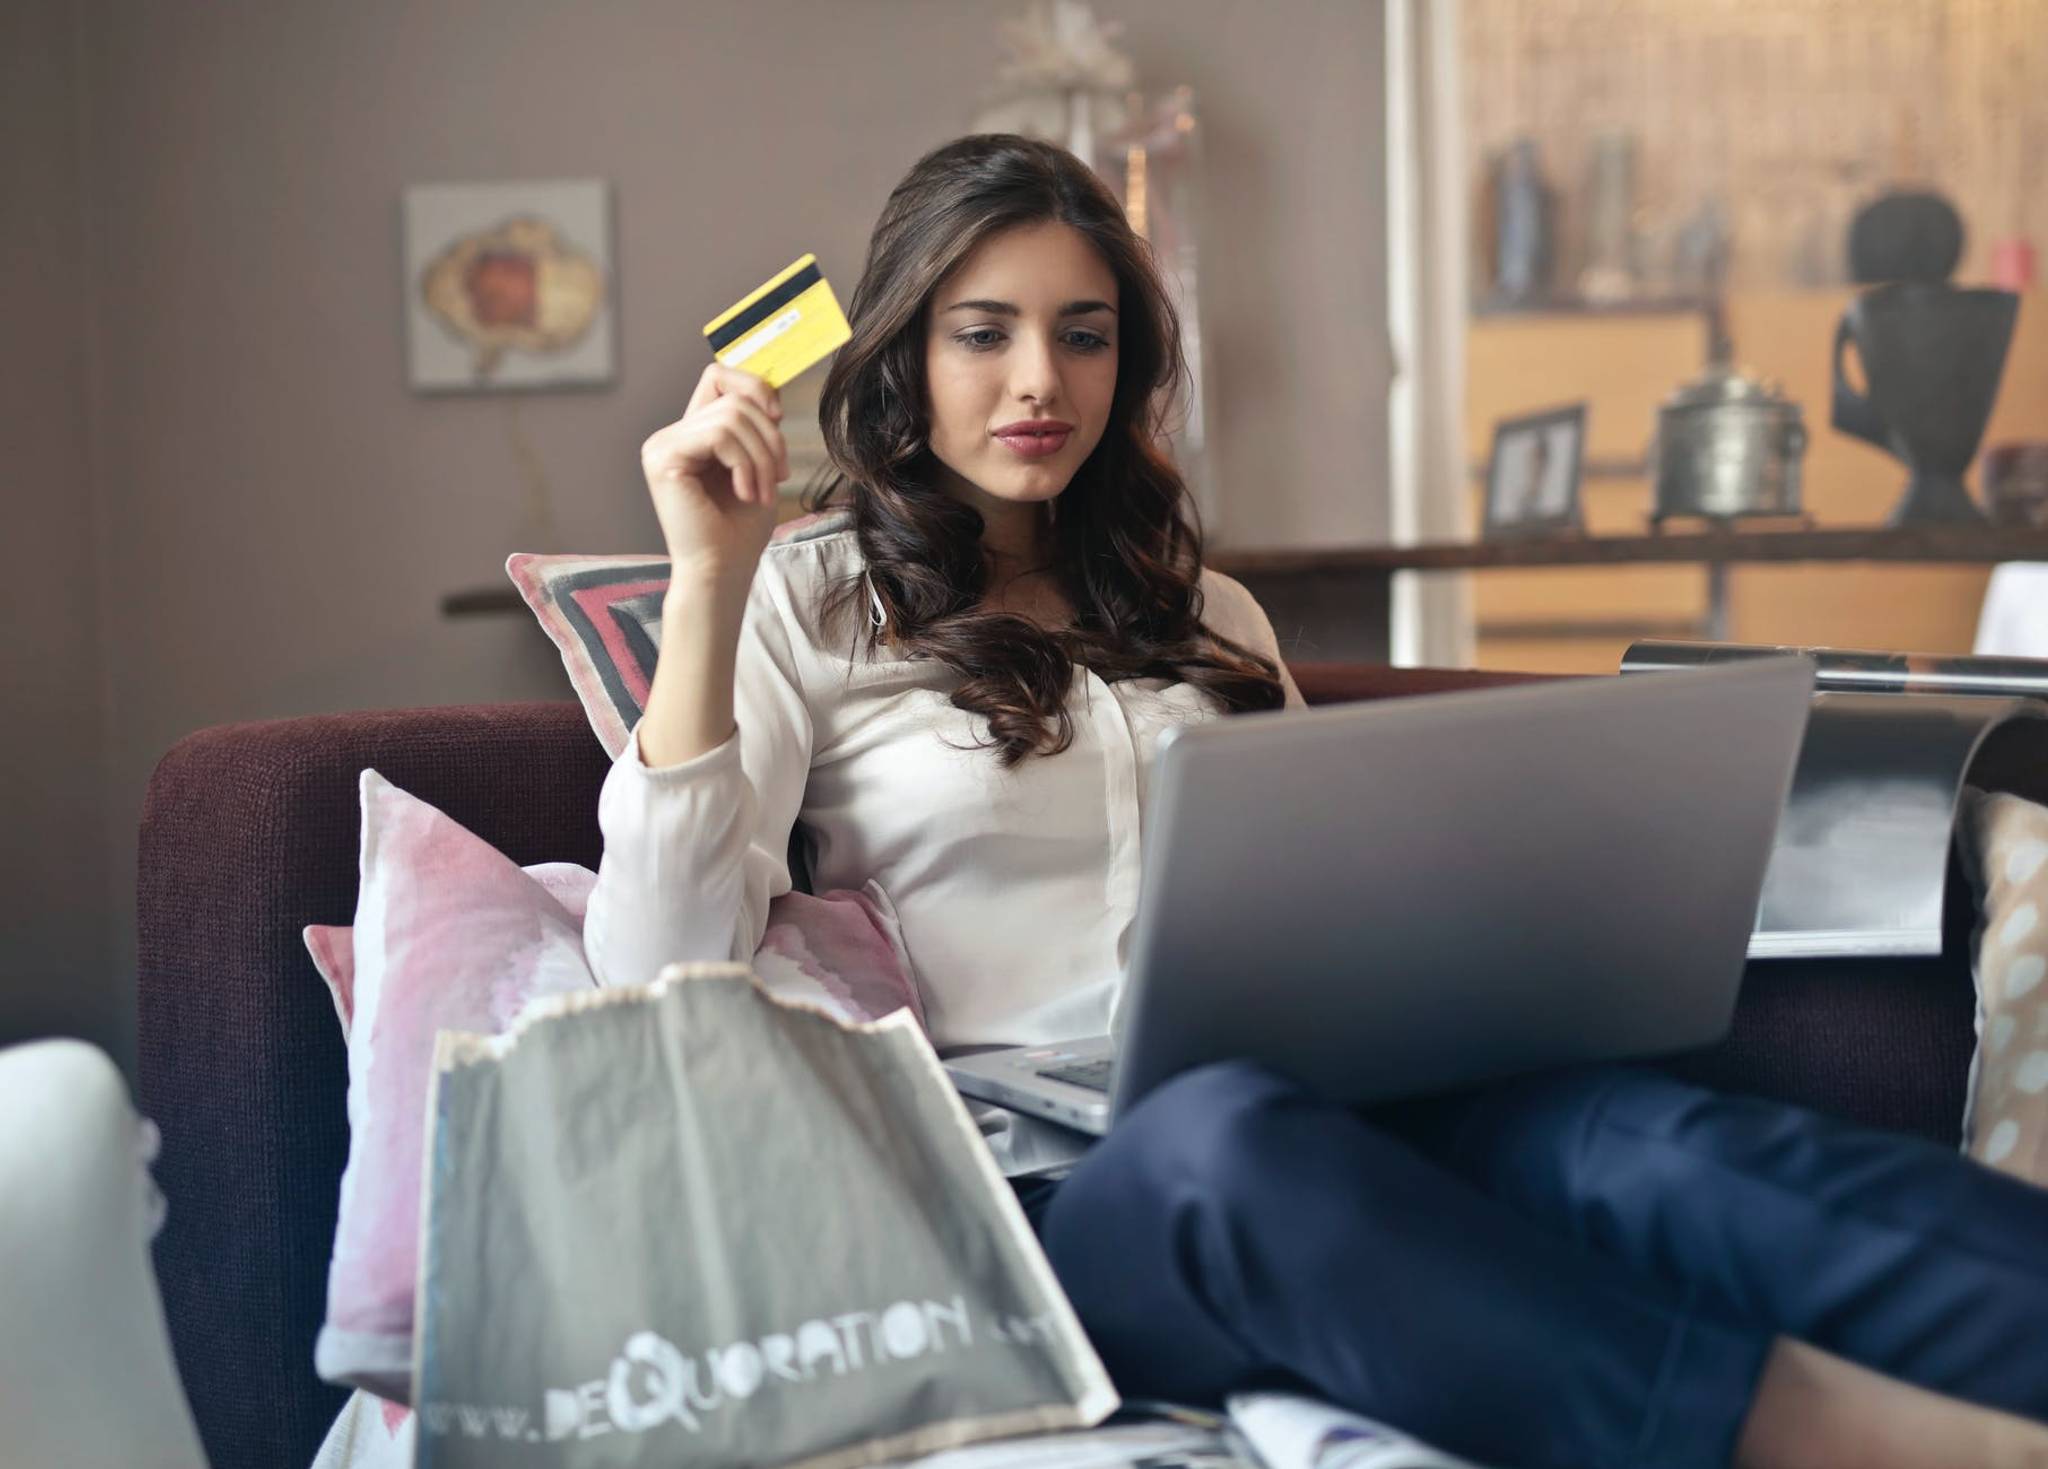 Convenience trumps loyalty for e-commerce choices